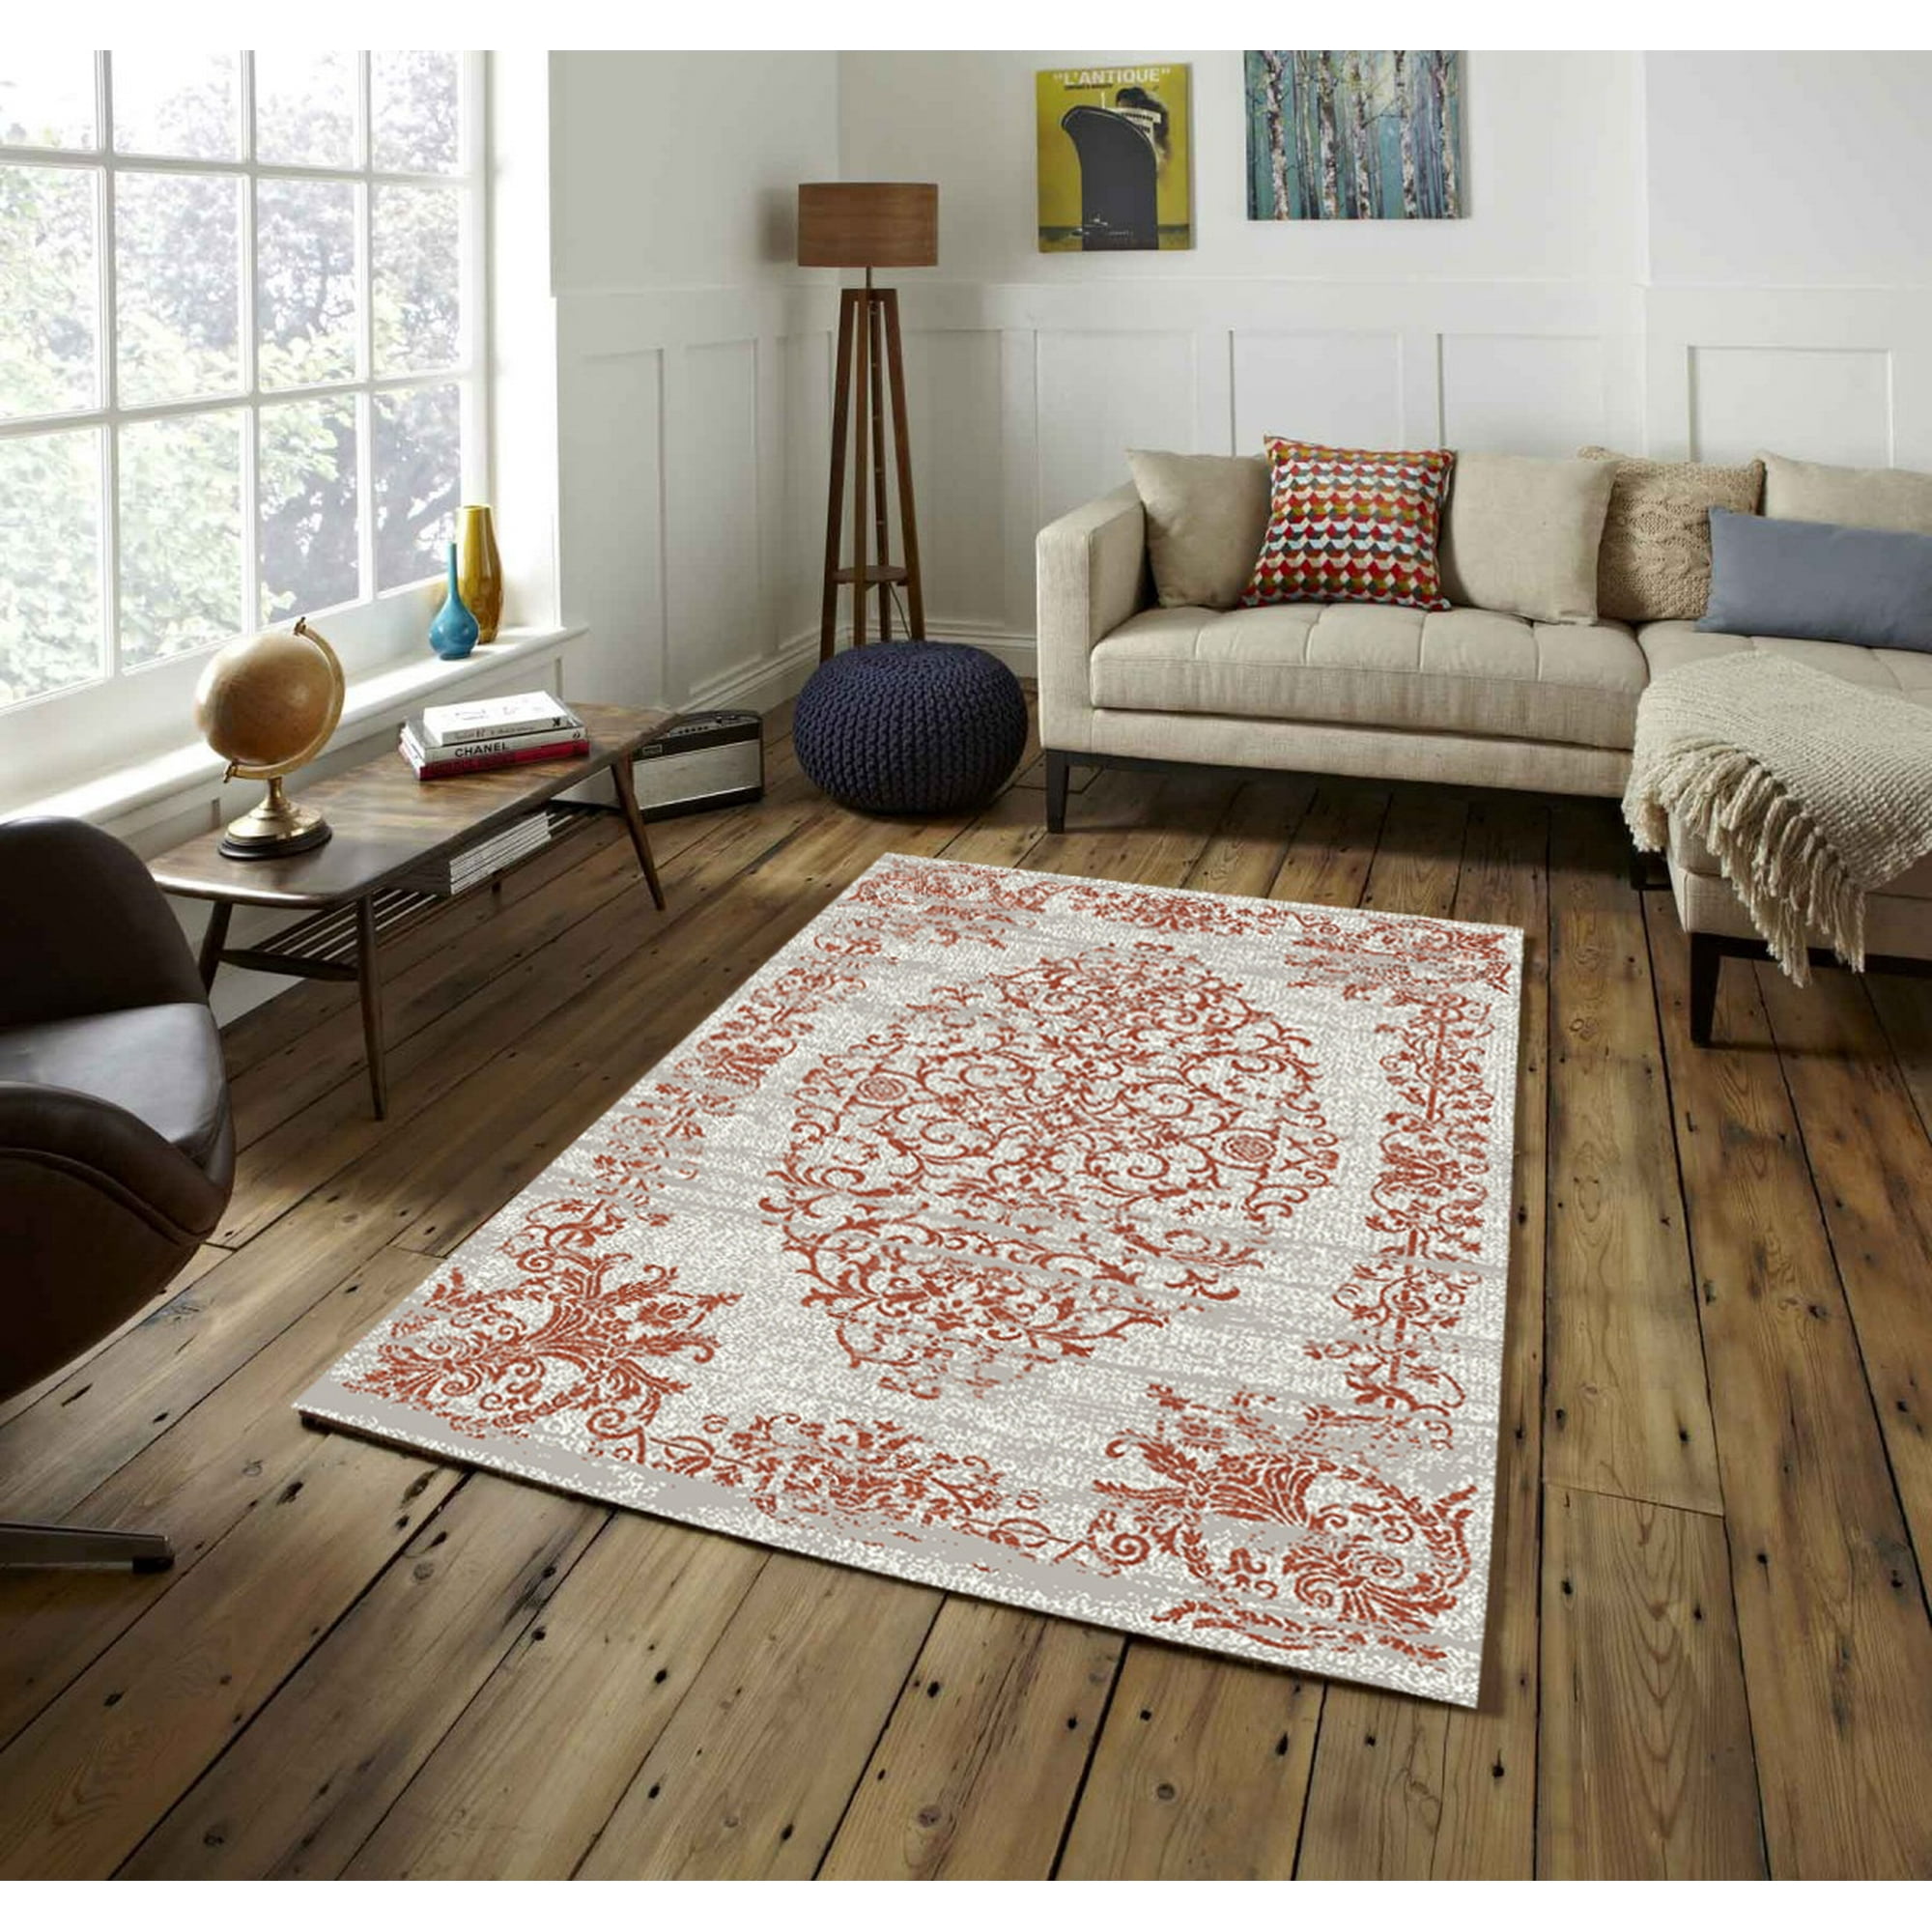 Oriental Pattern Area Rugs for Living Room Pierre Cardin Collection,  (Bedroom, Kitchen, Kids Room), Gloss, Soft, Easy Clean and Fade Resistant,  Beige,Orange 3x7 (3'3 x 6'9) 